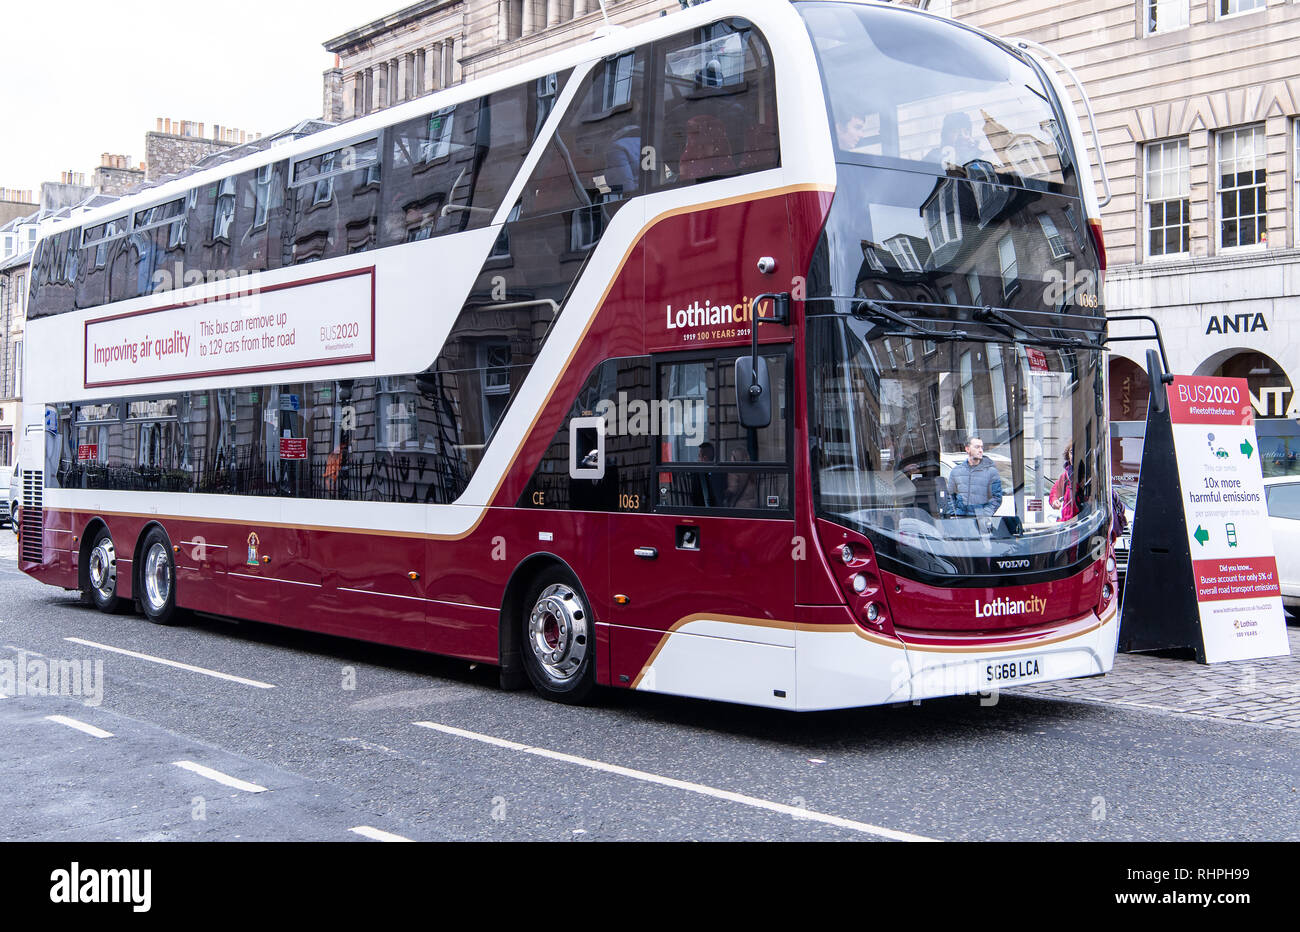 Lothian’s Bus 2020 strategy sees it committing to operating only buses which meet a minimum vehicle standard of Euro 5 or above by the end of 2020.  C Stock Photo